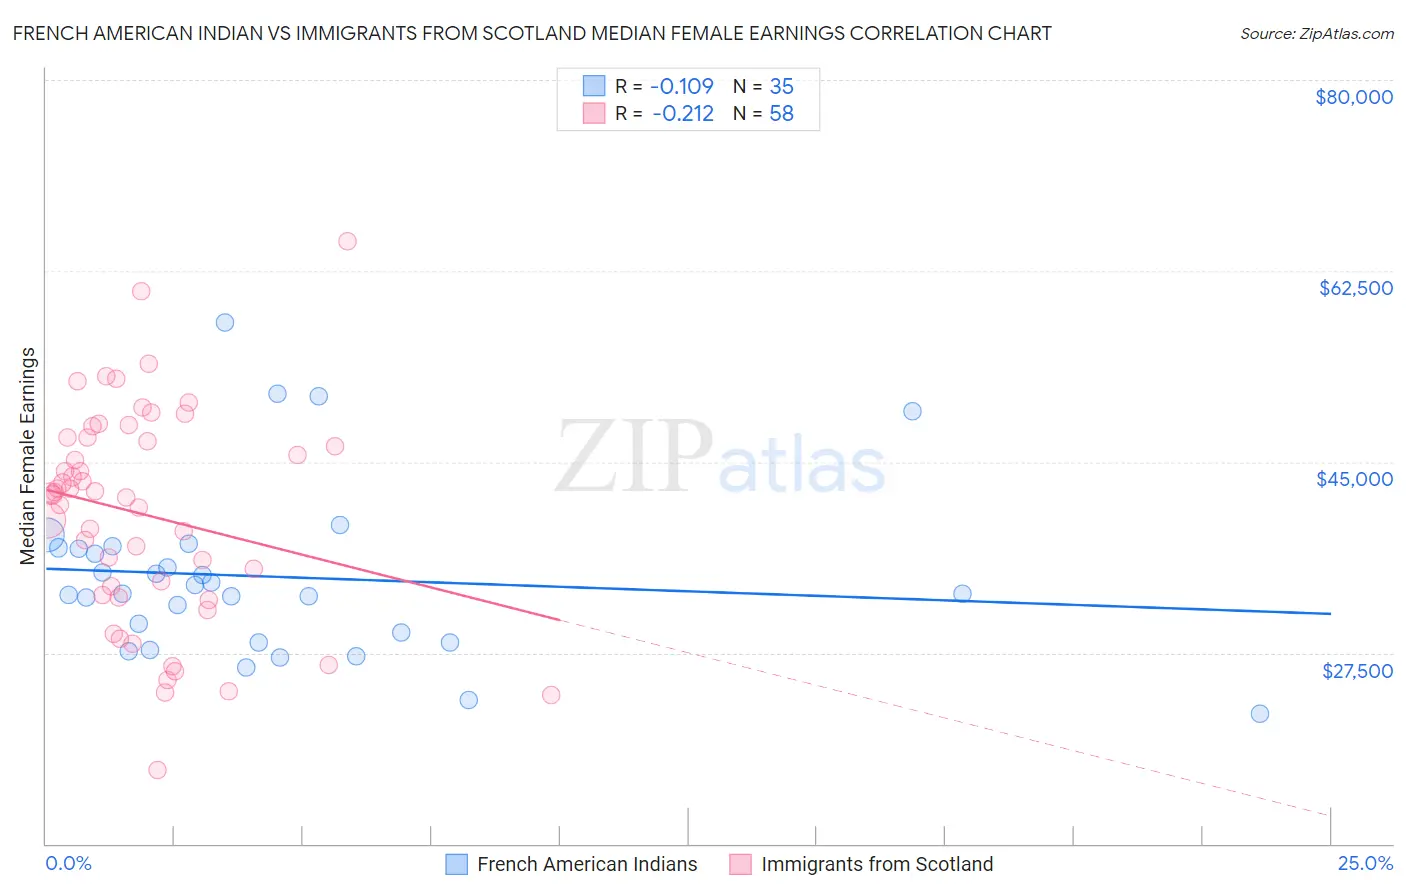 French American Indian vs Immigrants from Scotland Median Female Earnings